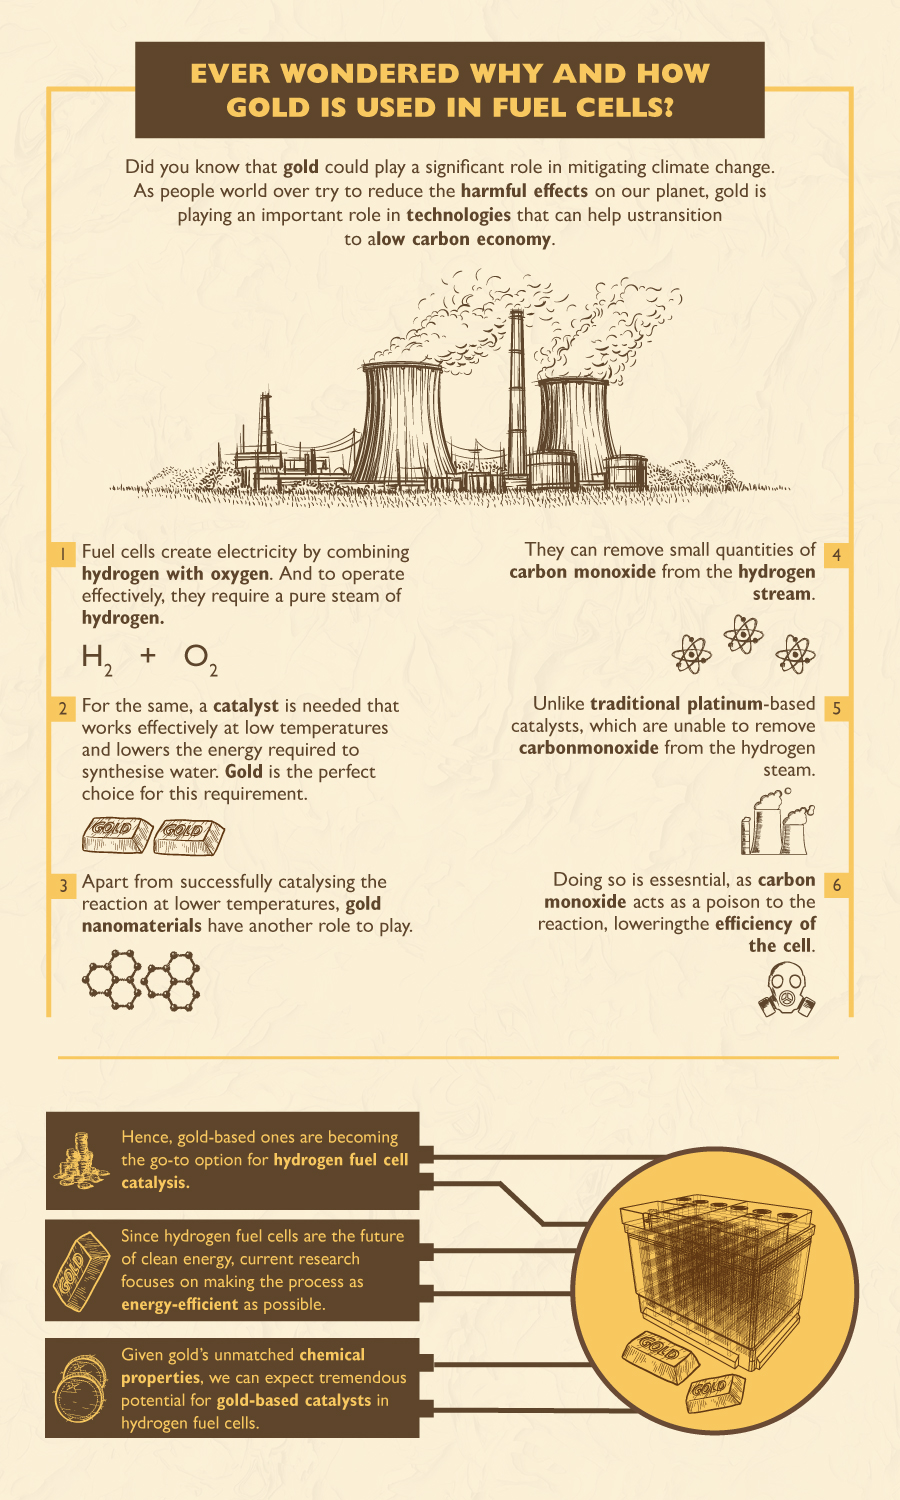 Know how Gold is used in fuel cells to make them energy-efficient.